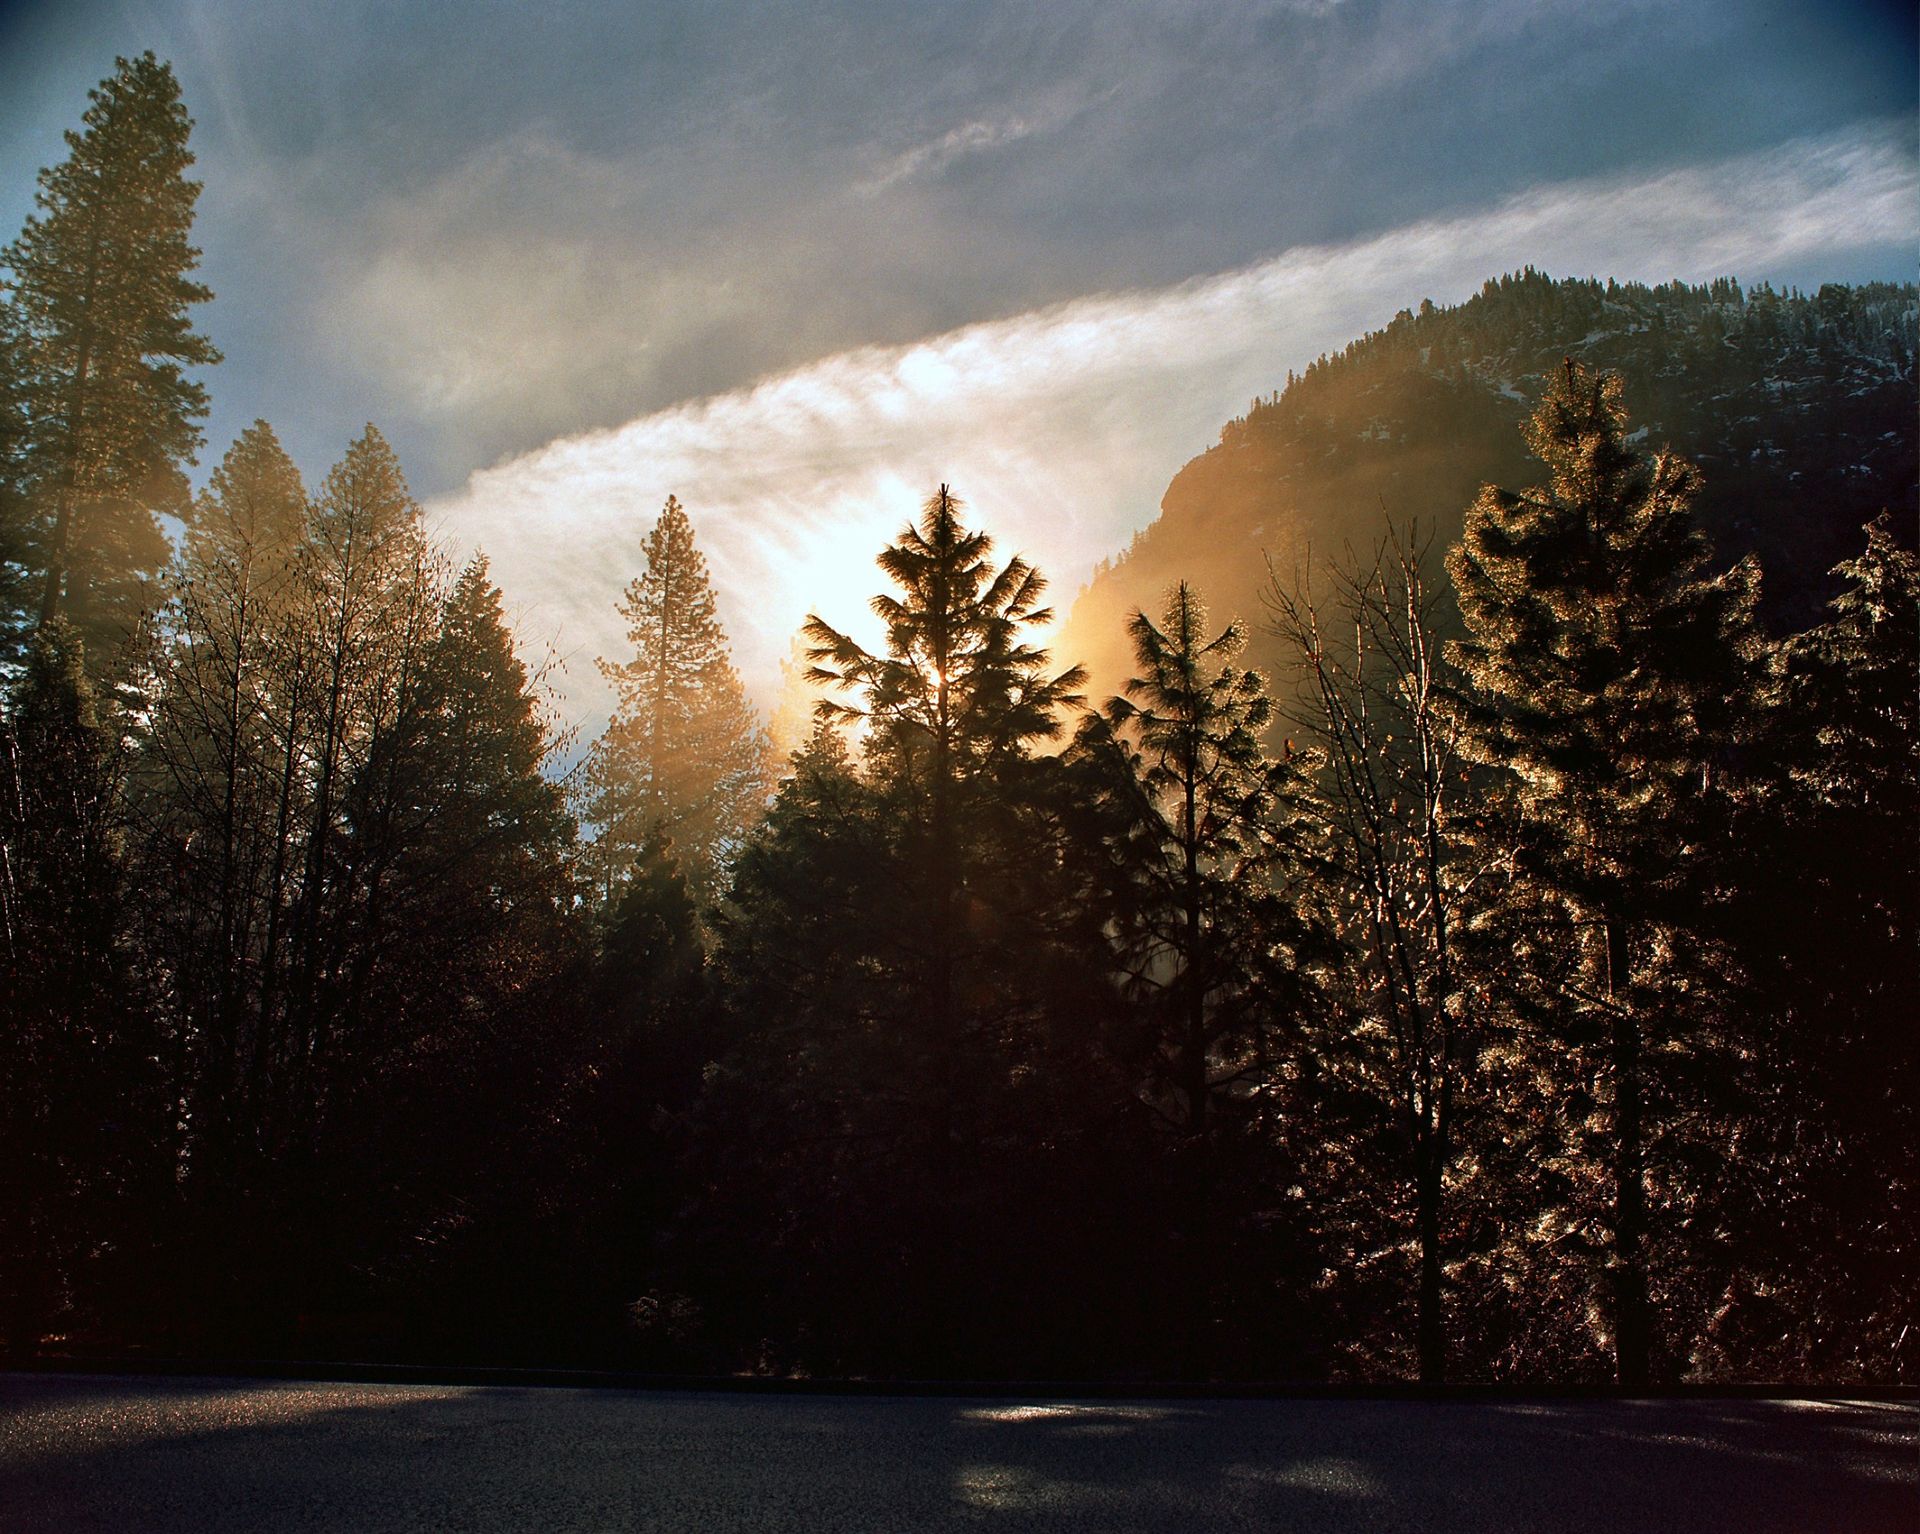 The sun peeks out from behind large pine trees at Yosemite.